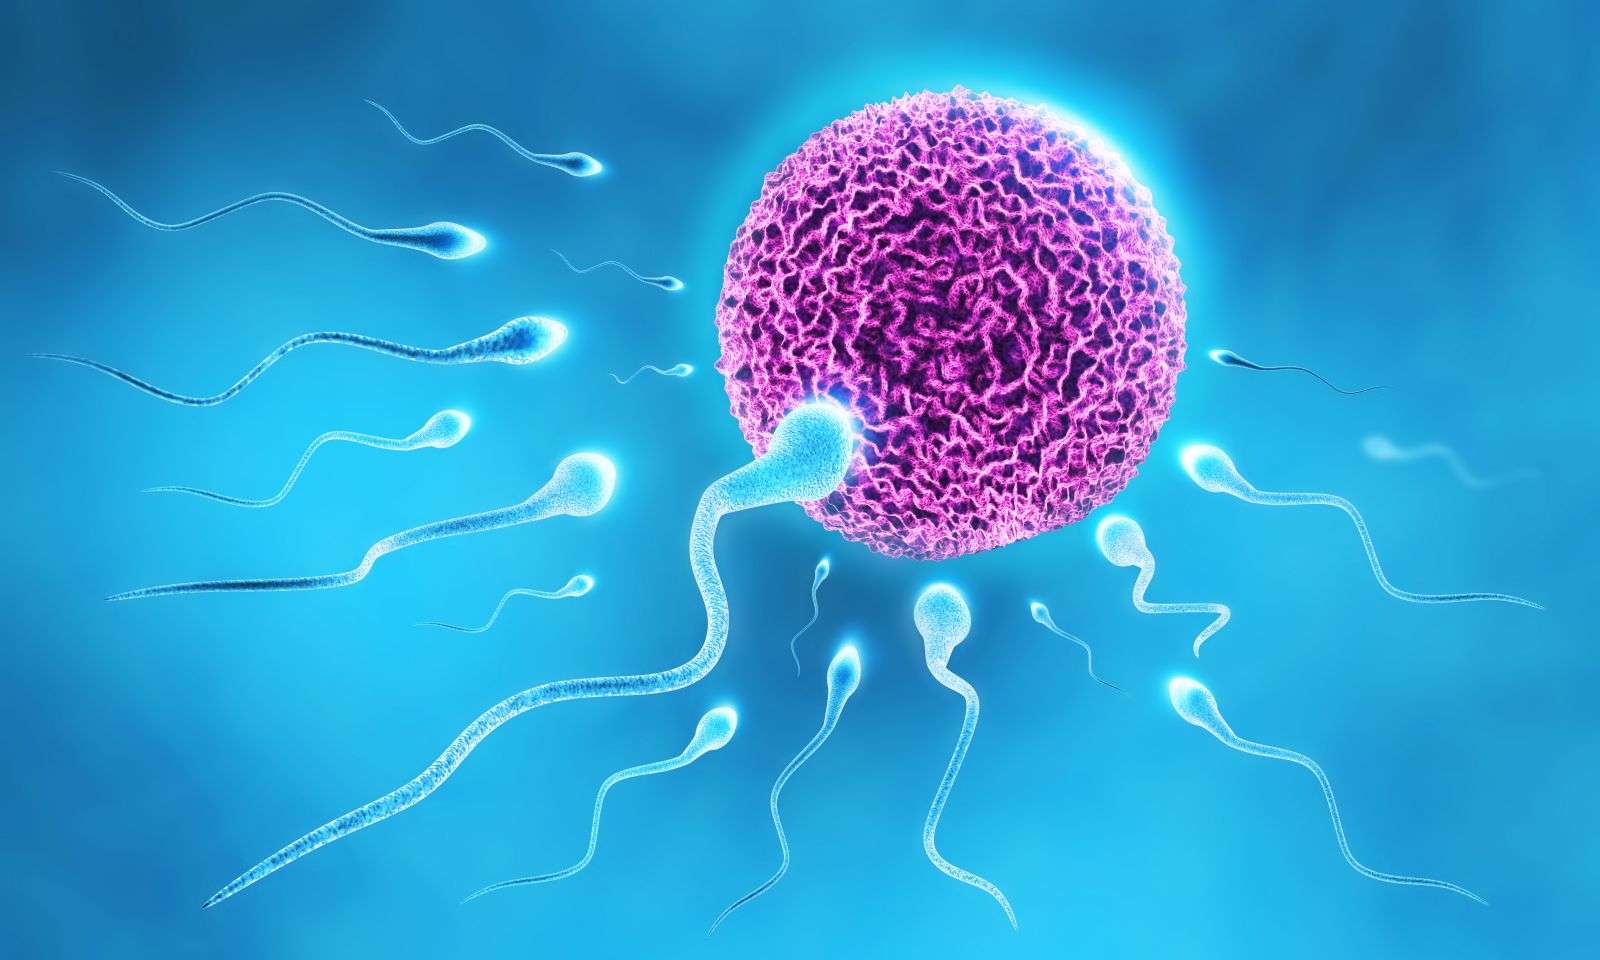 CAUSES OF INFERTILITY IN MEN